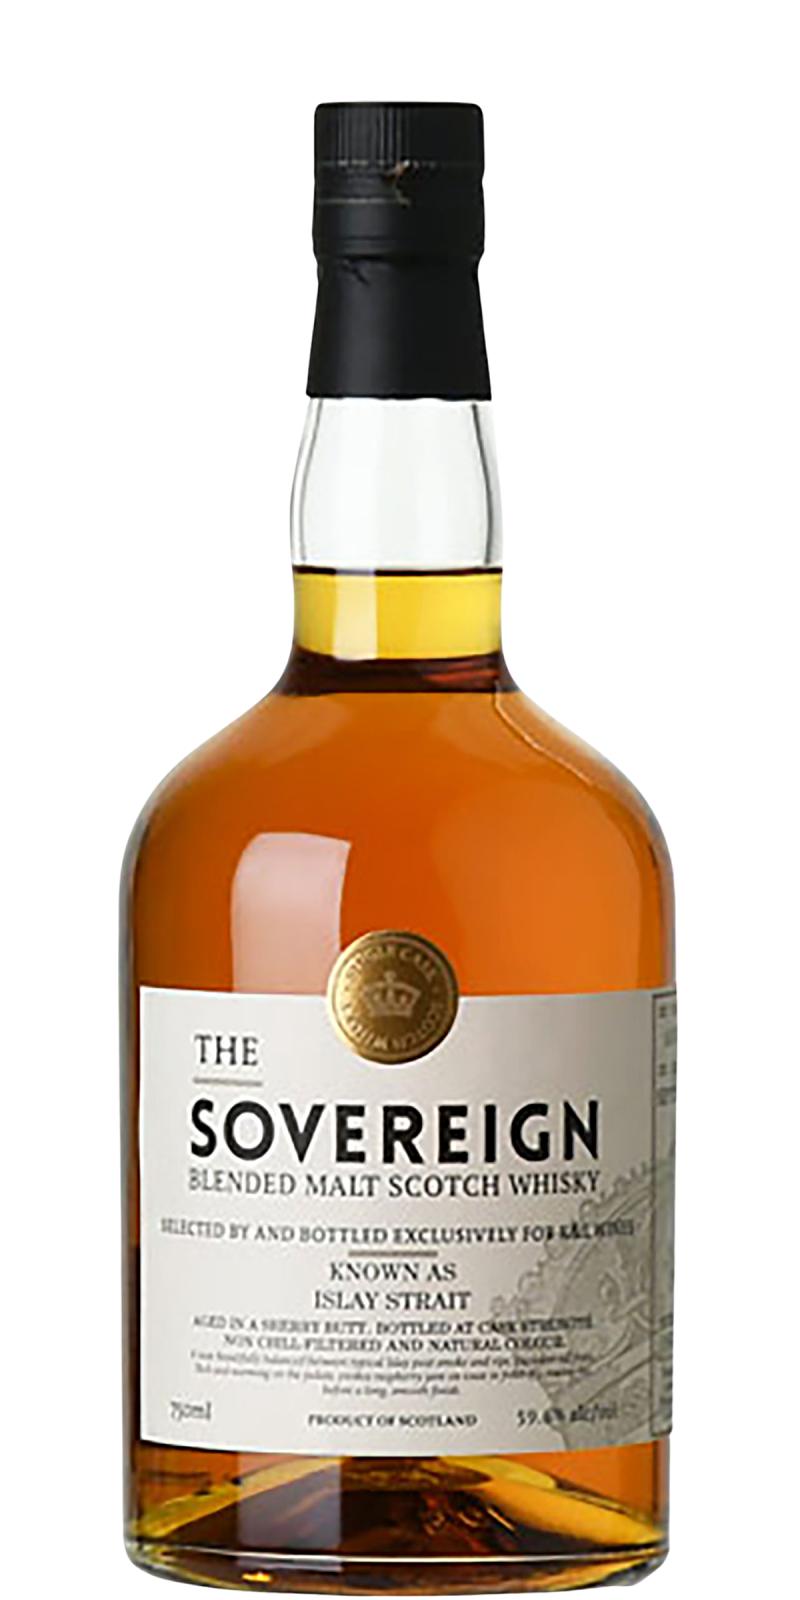 Islay Strait 2010 HL The Sovereign Sherry Butt Finish K&L Wine Merchants Exclusive 59.6% 750ml